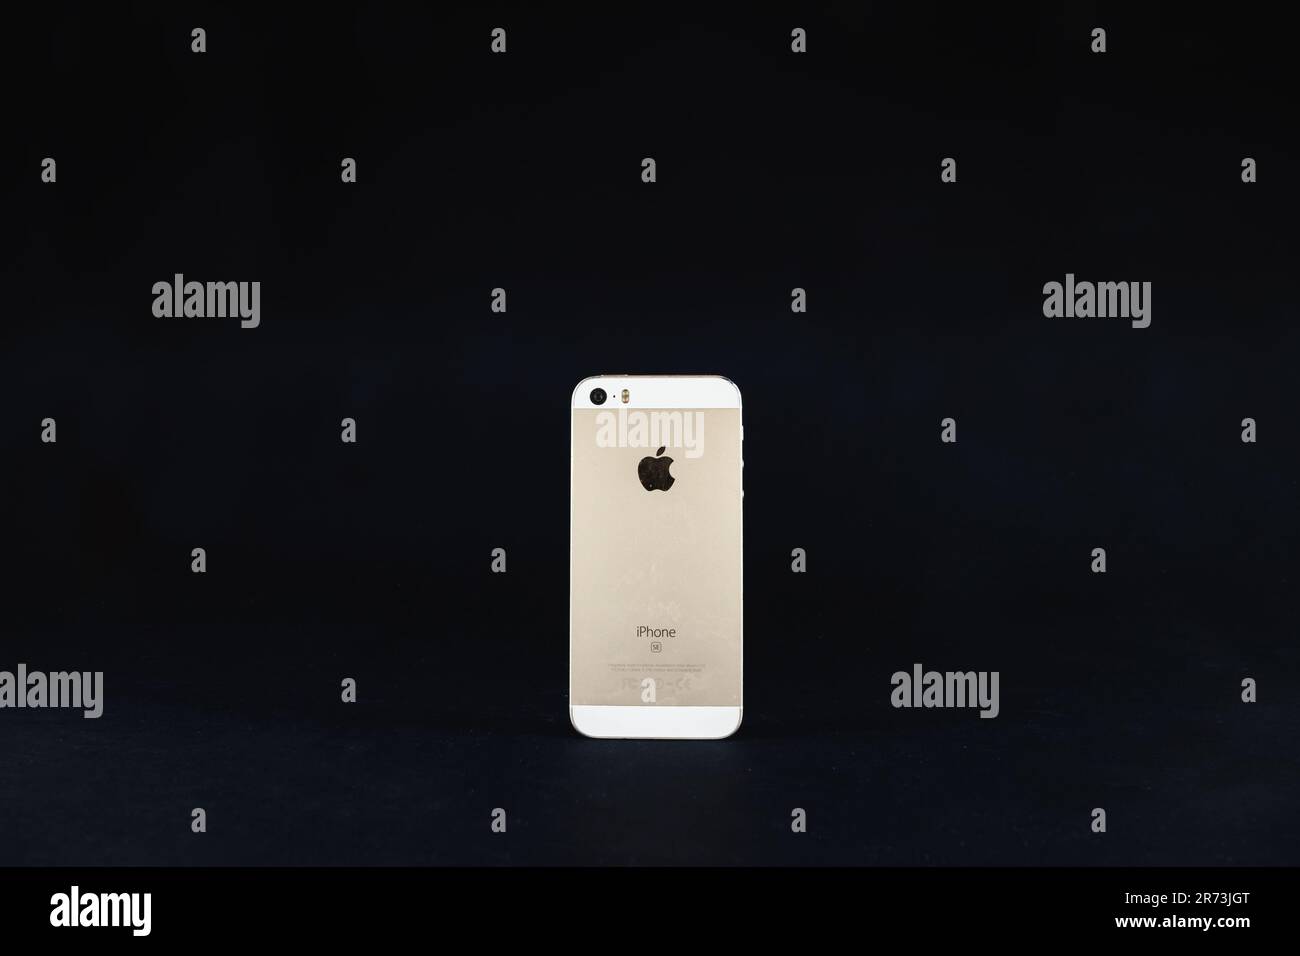 Picture of an Apple Iphone SE first generation on a black background. The iPhone SE is a smartphone designed and marketed by Apple Inc. as part of the Stock Photo